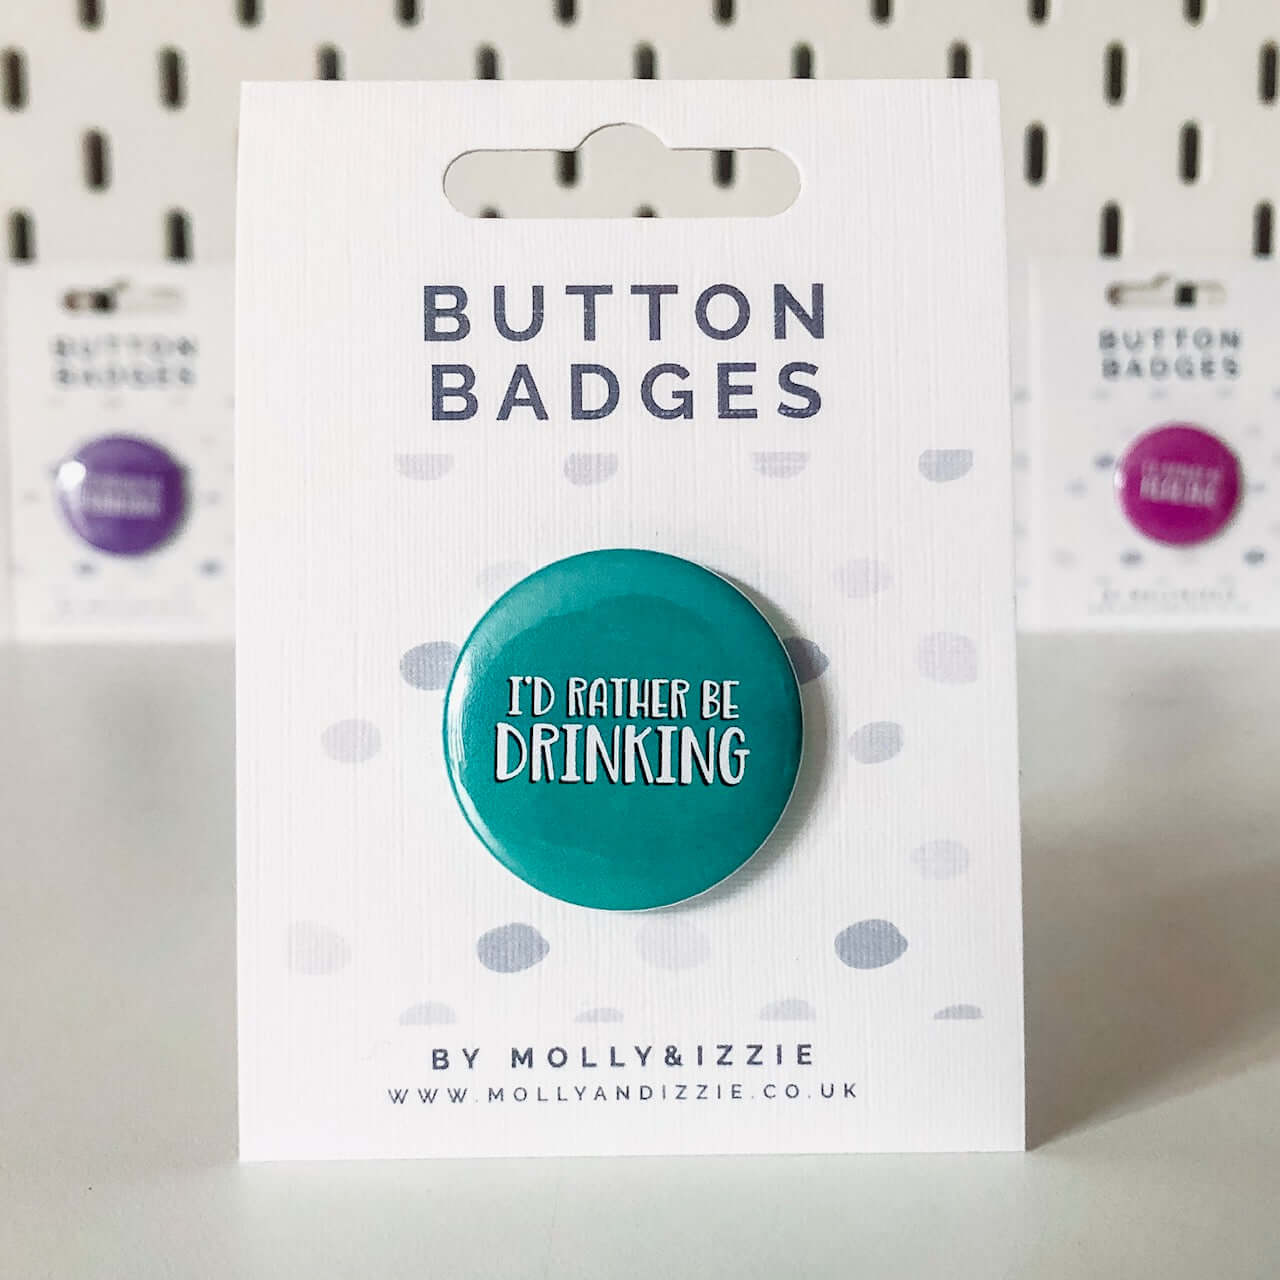 by Molly & Izzie I'd Rather Be Drinking Button Badge Button Badge By Molly & Izzie